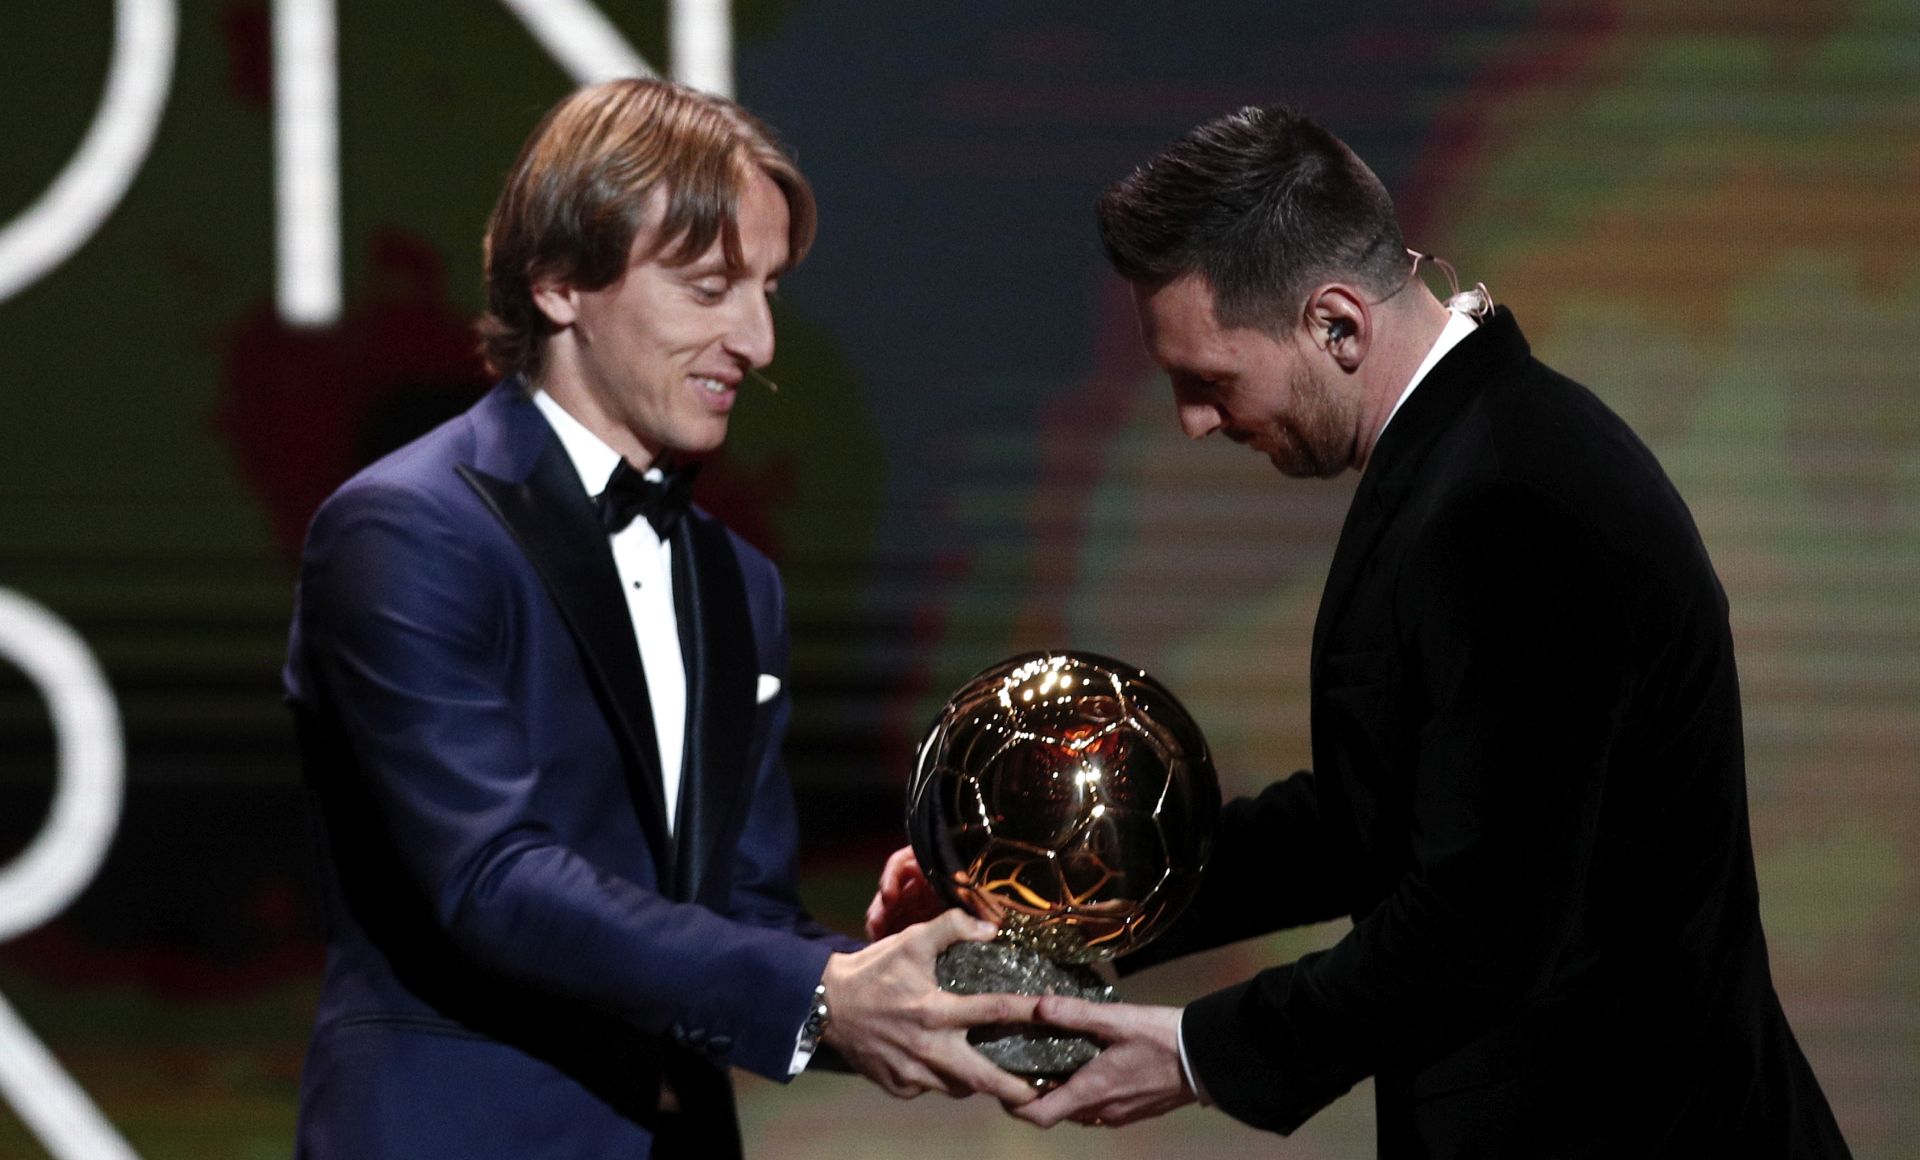 epa08040261 Barcelona forward Lionel Messi (R) wins the Men's 2019 Ballon d'Or and receives the award from the 2018 winner Luka Modric at the Ballon d'Or ceremony at Theatre du Chatelet in Paris, France, 02 December 2019.  EPA/YOAN VALAT